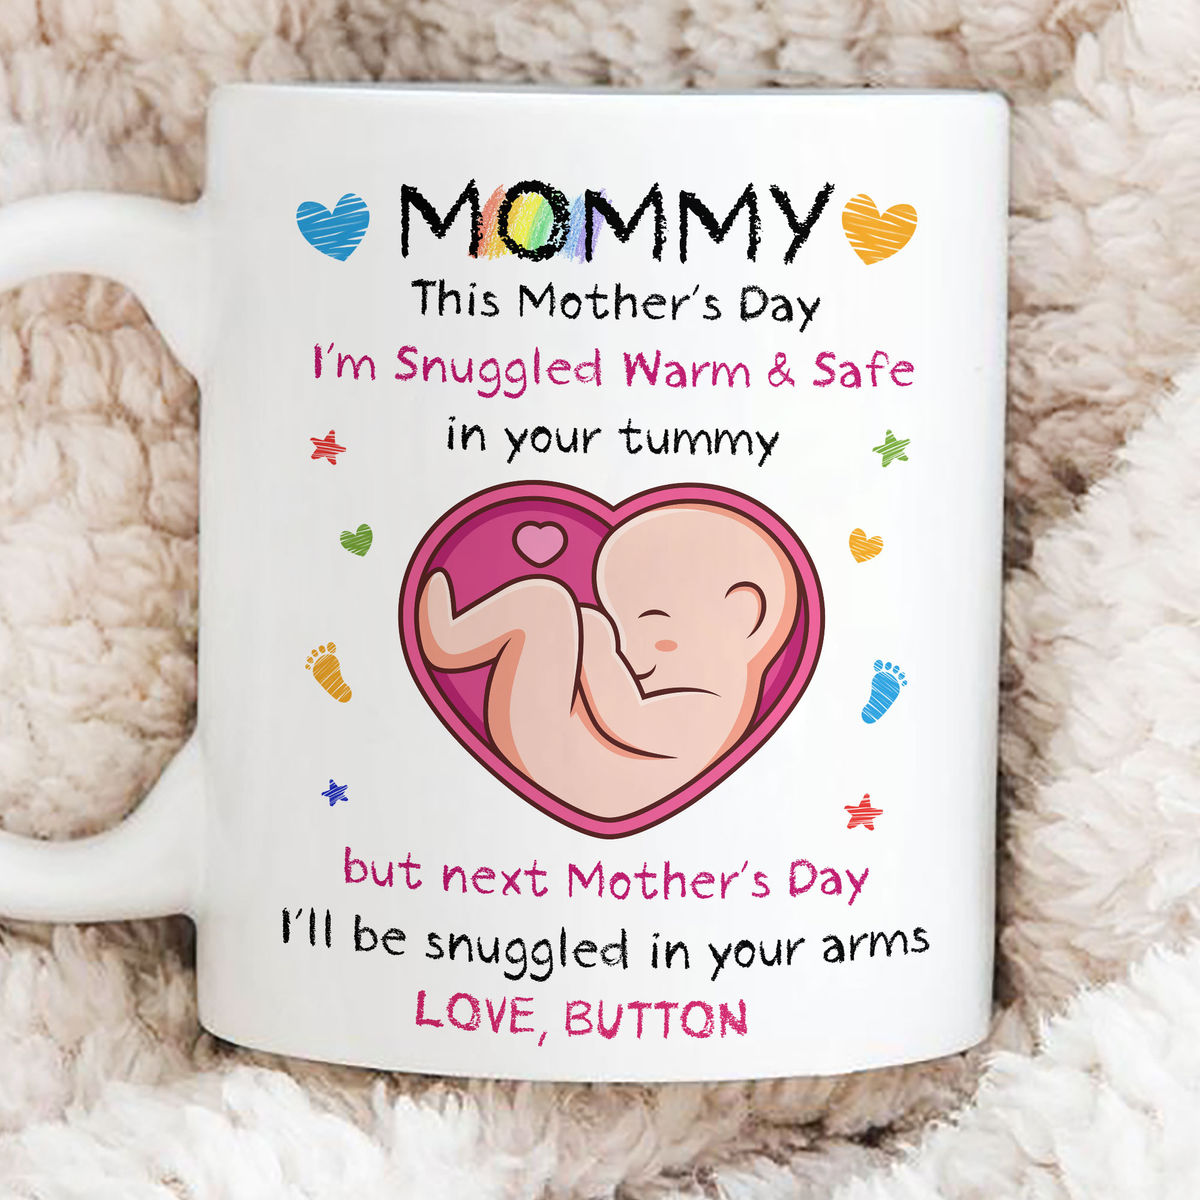 Personalized Mug - From The Bump - Mommy, This Mother's Day I'm Snuggled Warm & Safe In Your Tummy. But next Mother's Day, I'll be Snuggled in your arms (v2)_4